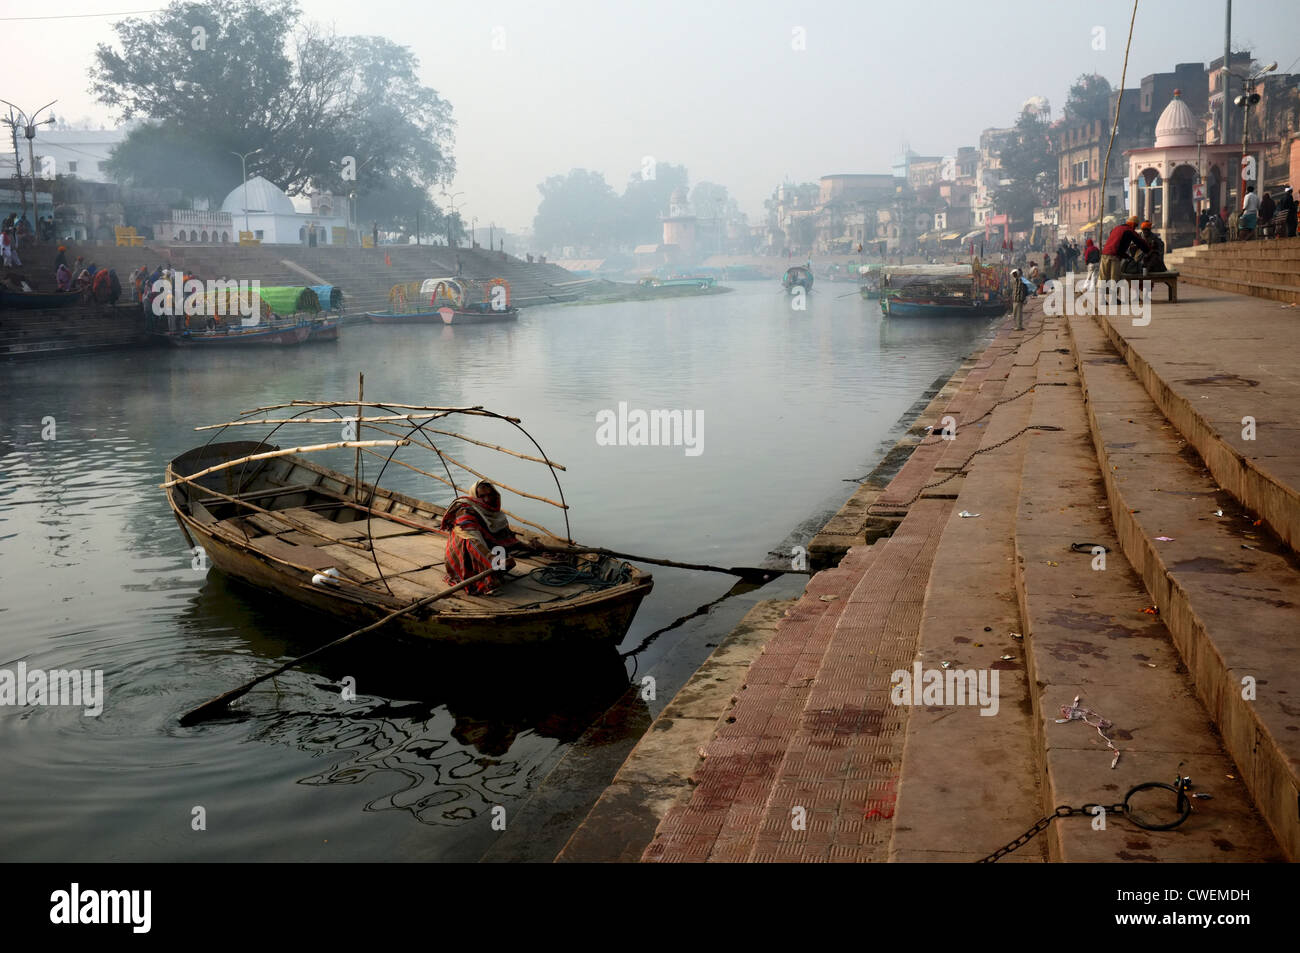 A boatman waits for a client in Chitrakoot, India. Stock Photo